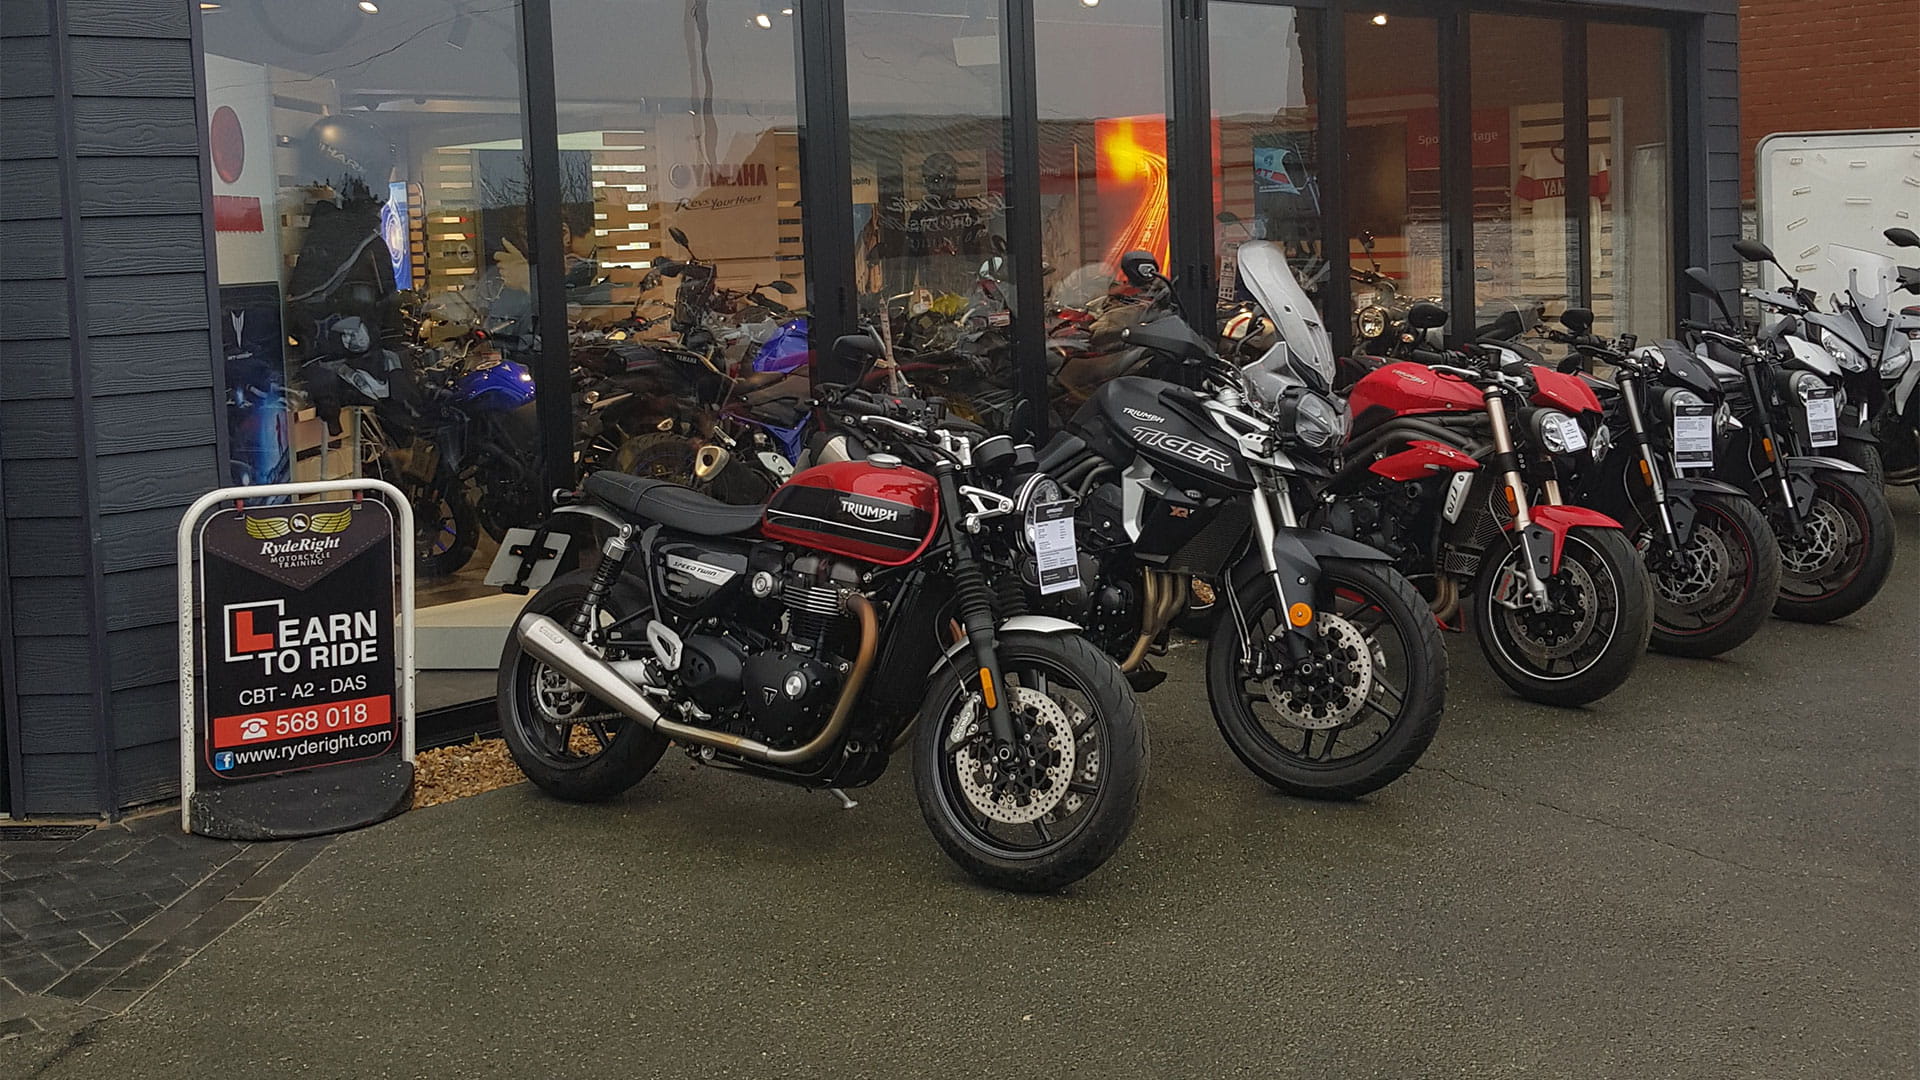 Triumph motorcycles dealership in Newport - Dave death motorcycles